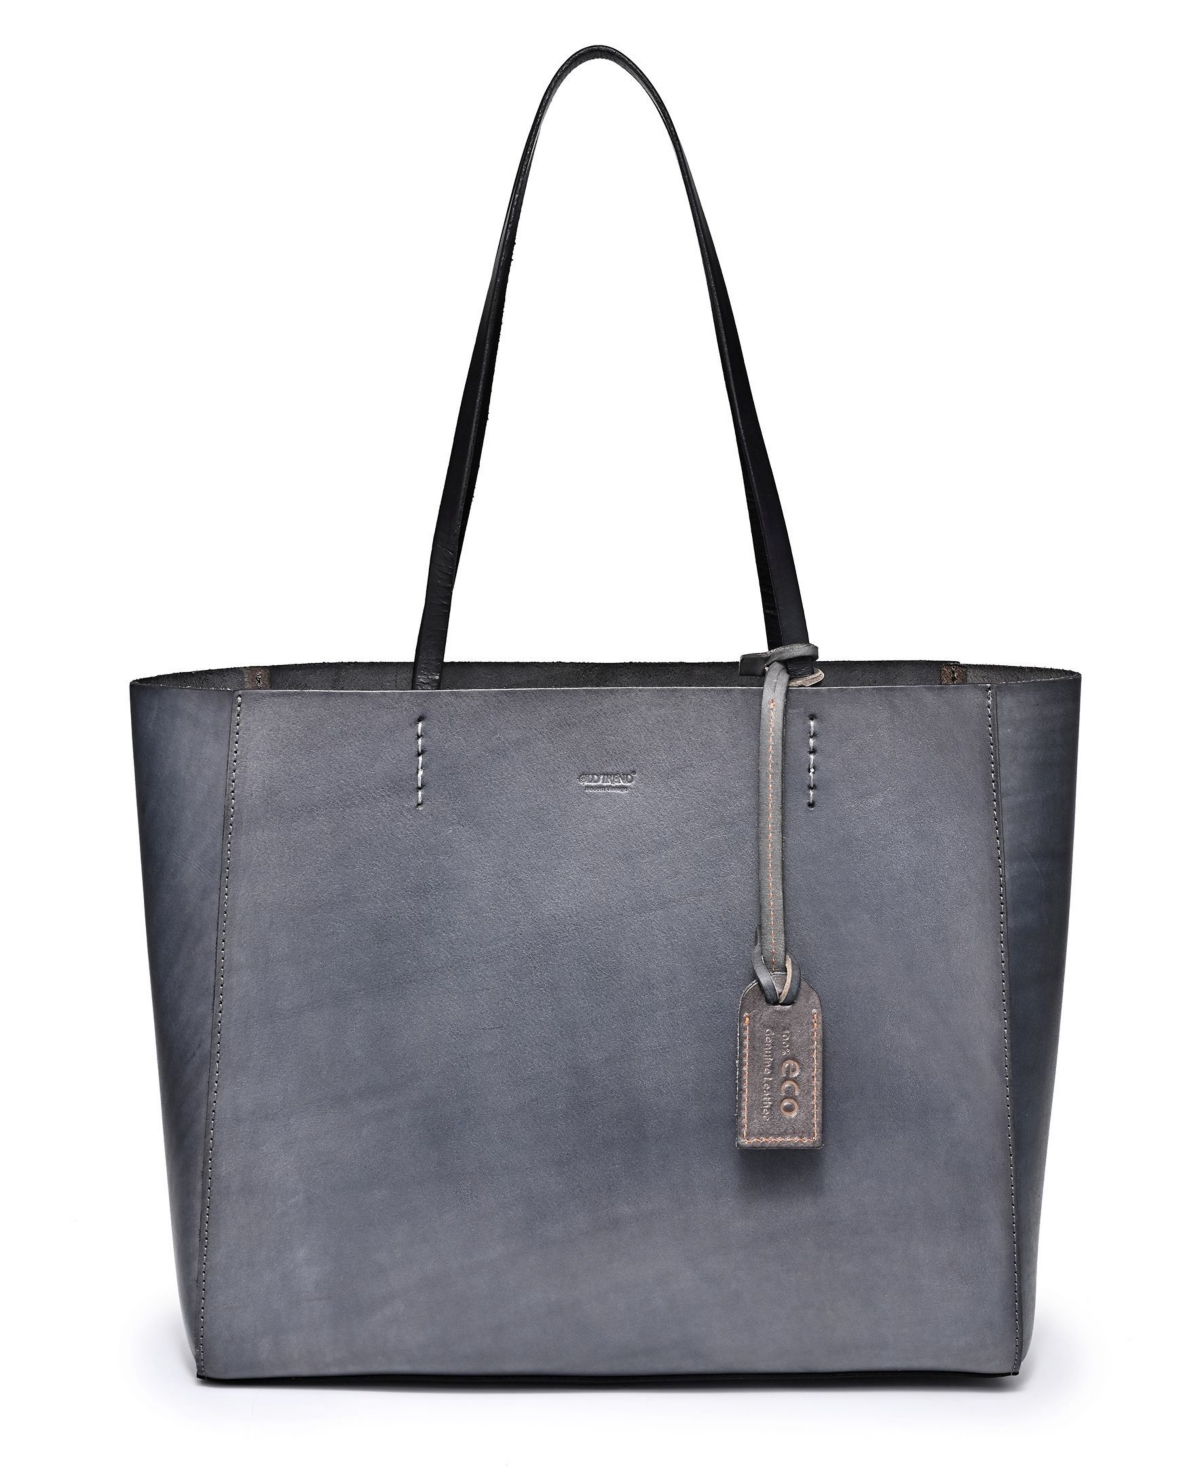 Women's Genuine Leather Out West Tote Bag - Gray